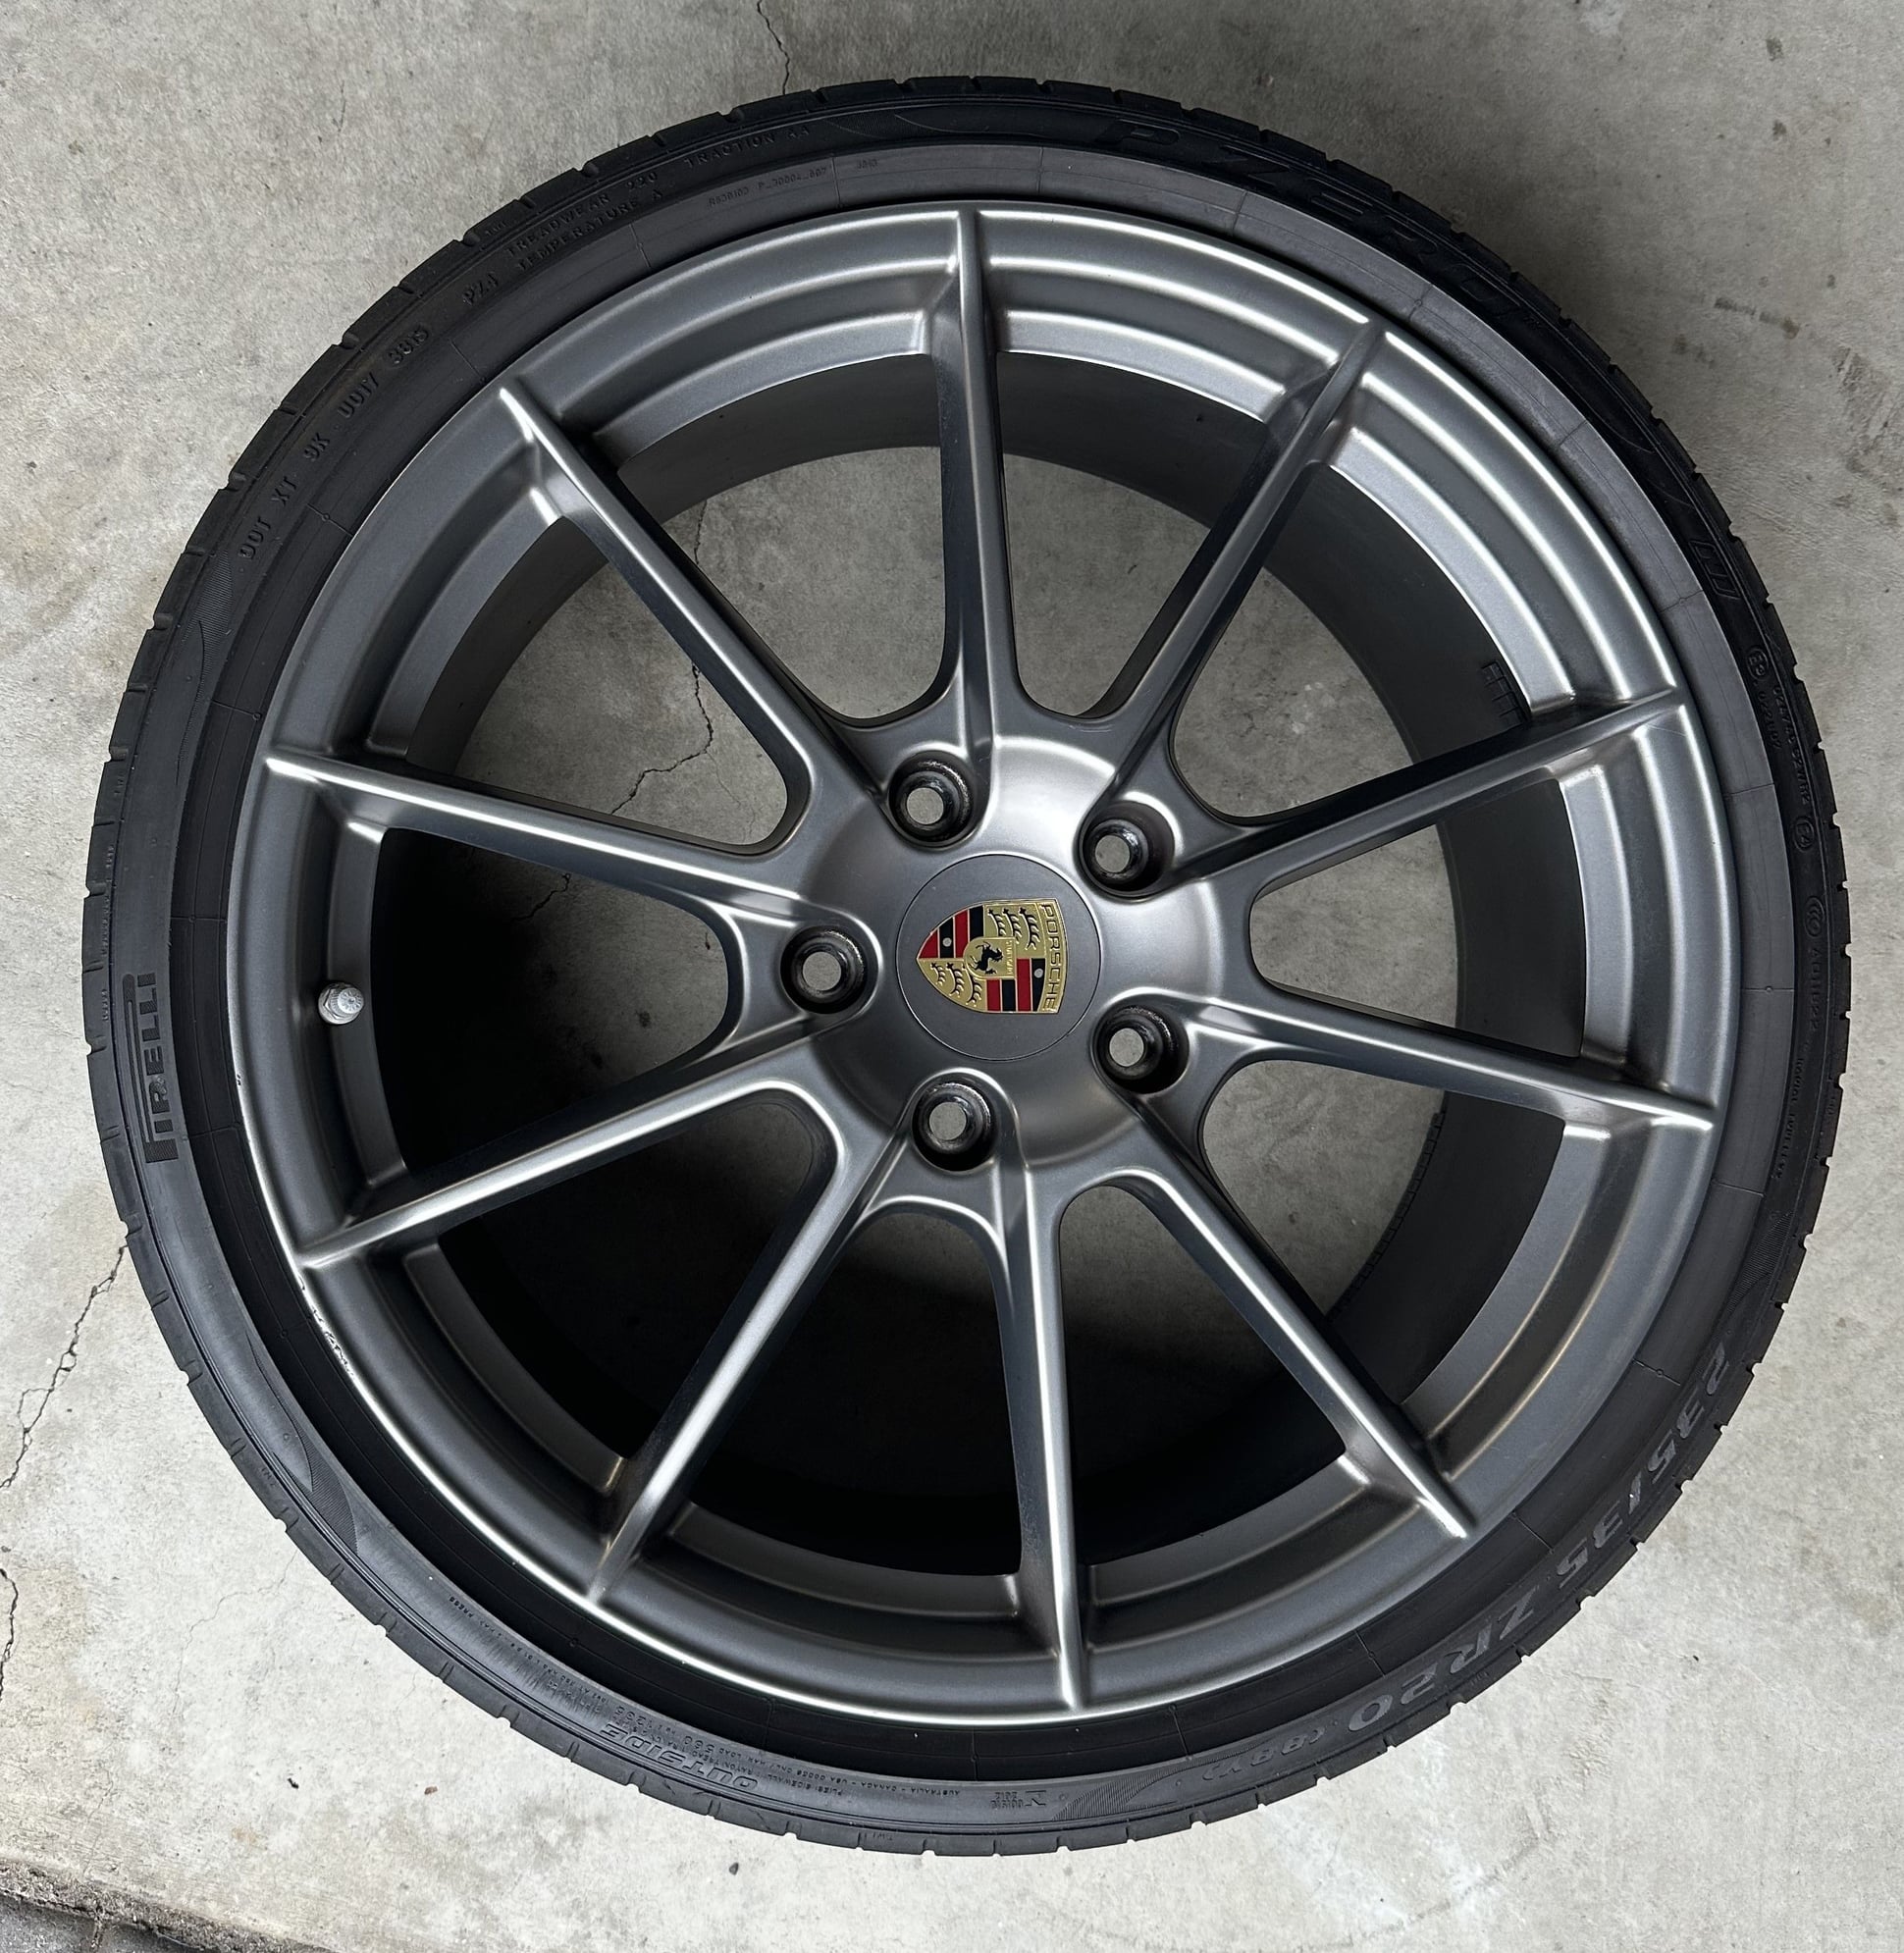 Wheels and Tires/Axles - For Sale:  20” Porsche Wheelset For 981 Boxster (and others). - Used - 2012 to 2016 Porsche Boxster - Fort Lee, NJ 07024, United States